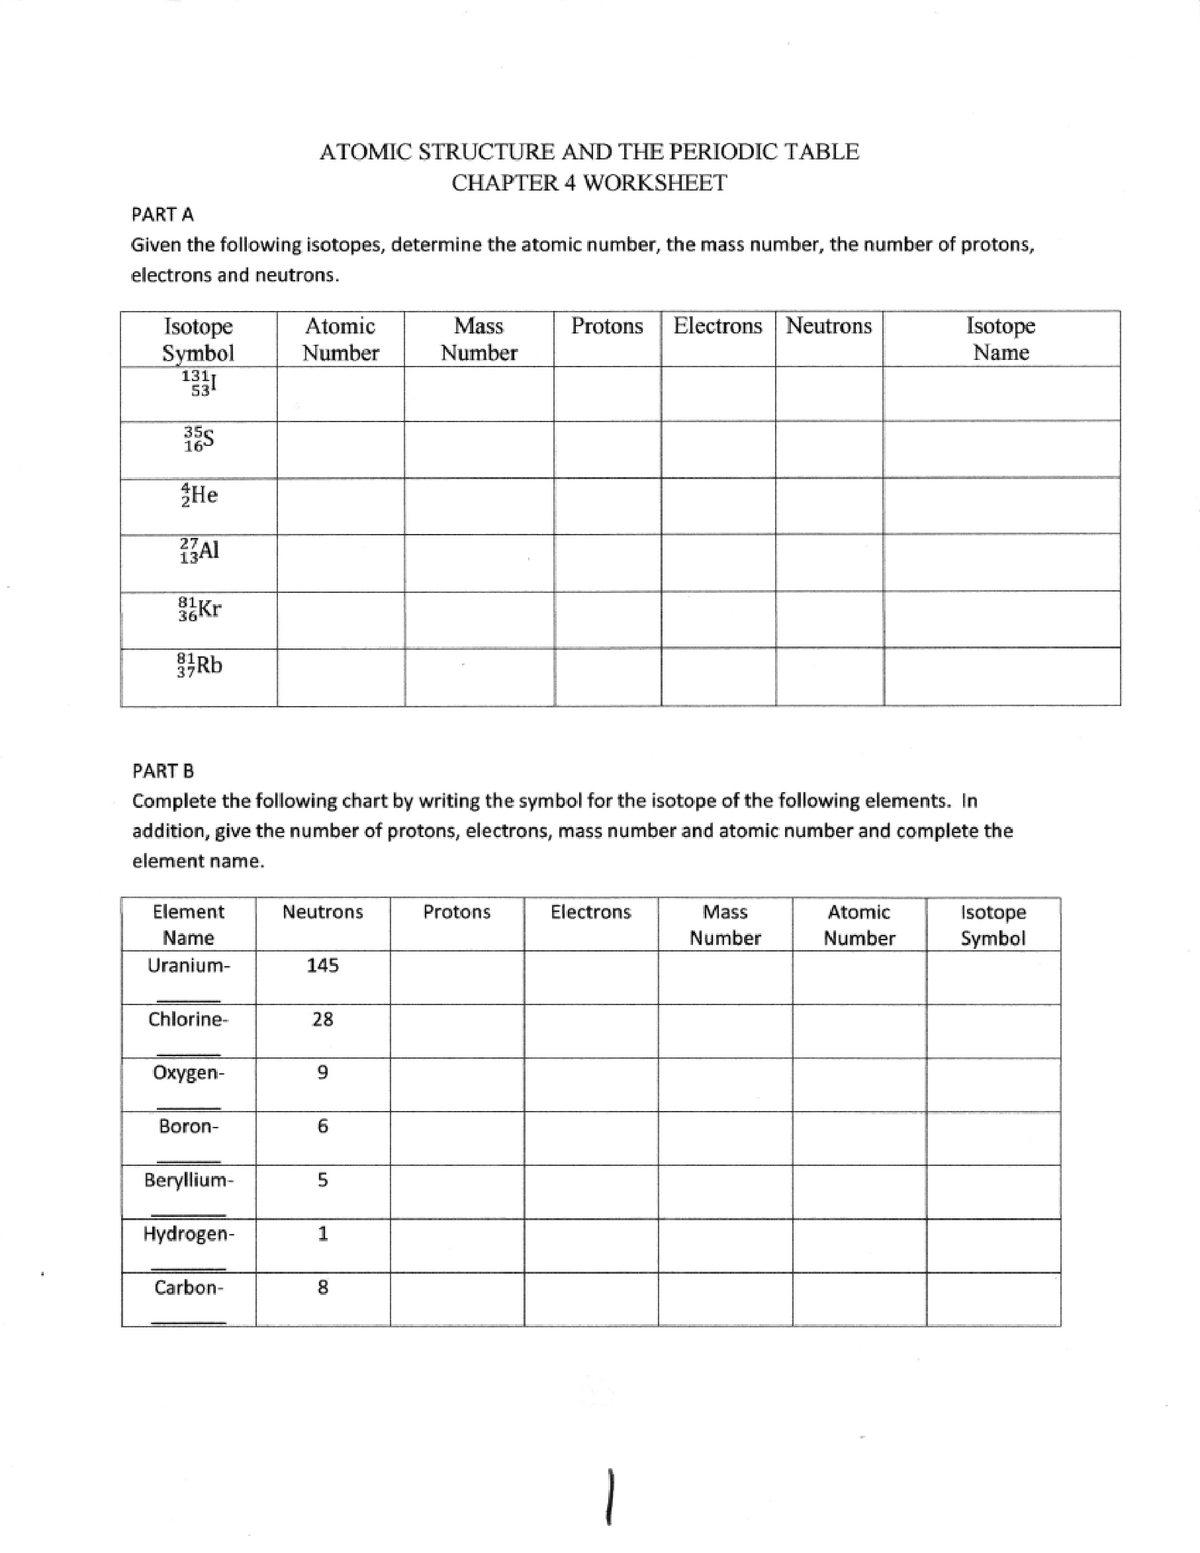 Isotope review packet - ATOMIC STRUCTURE AND THE PERIODIC TABLE With Atomic Structure Worksheet Chemistry